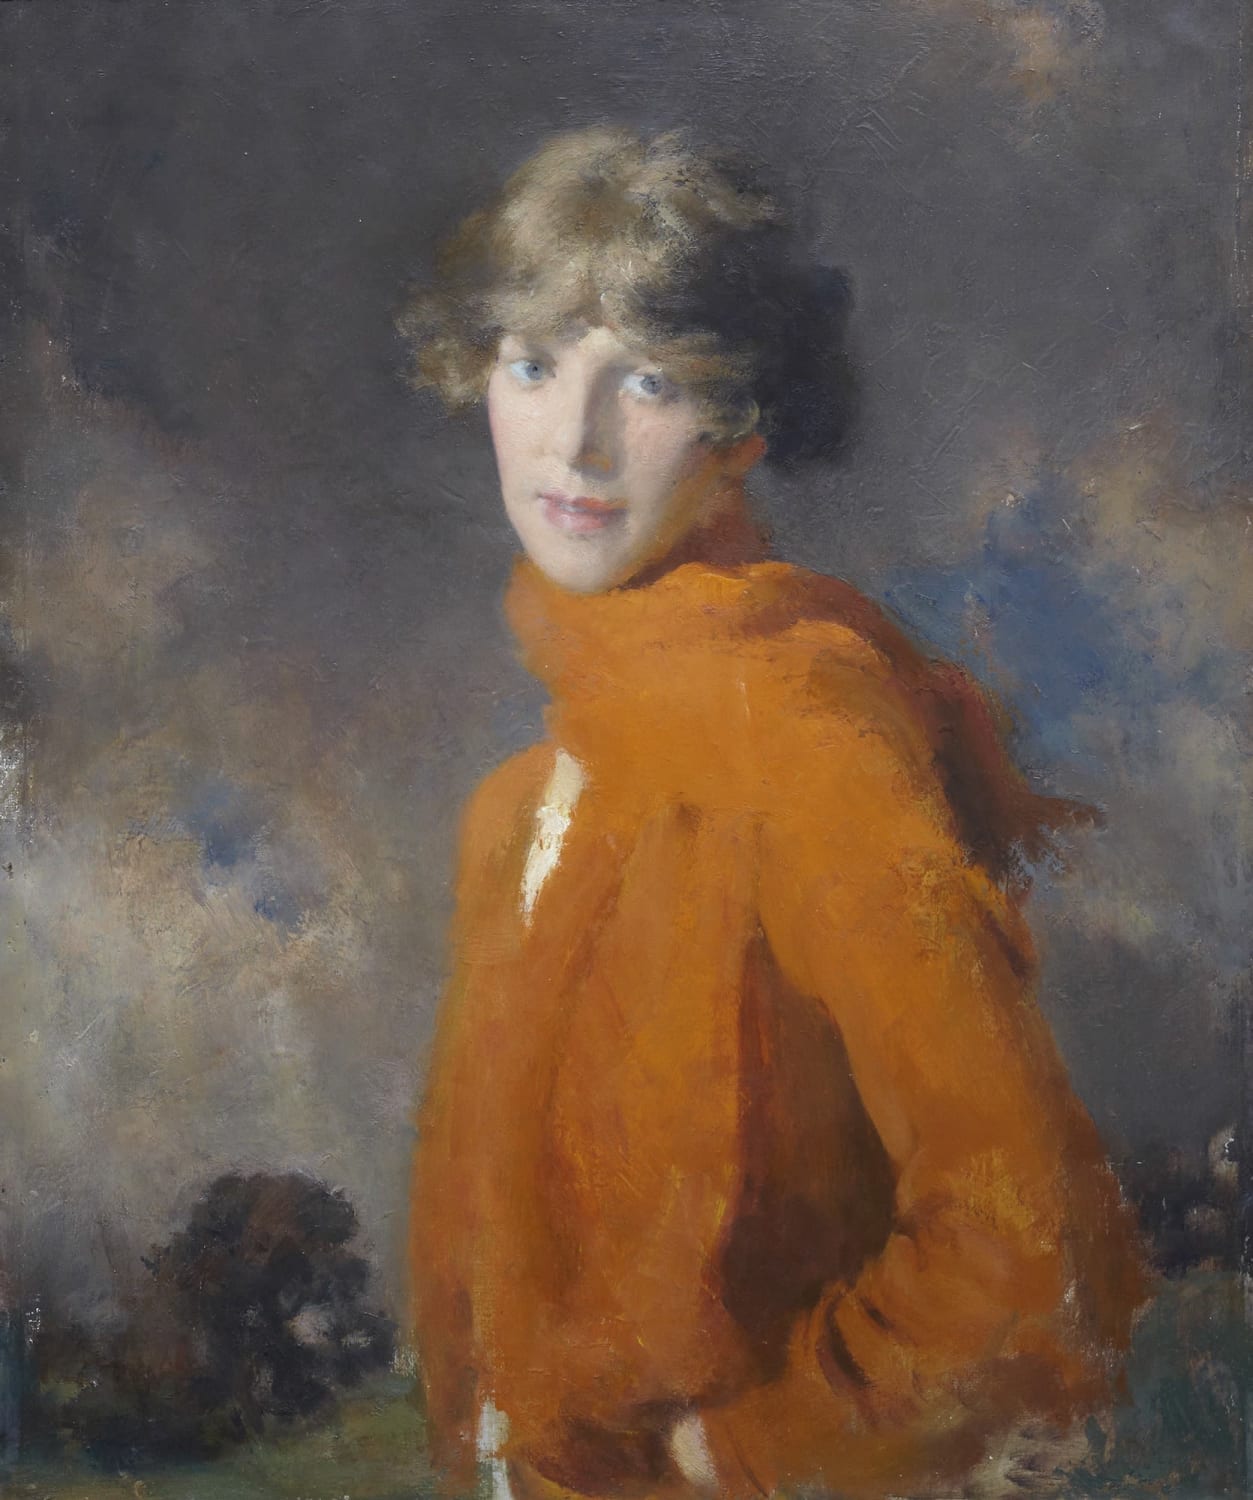 Henry Lintott RSA (1877-1965), Orange and Grey [the artist's first wife]  Oil on canvas, around 1919, 76.4 x 63.7cm  RSA Thorburn Ross Memorial Fund Purchase (1919) 1992.008